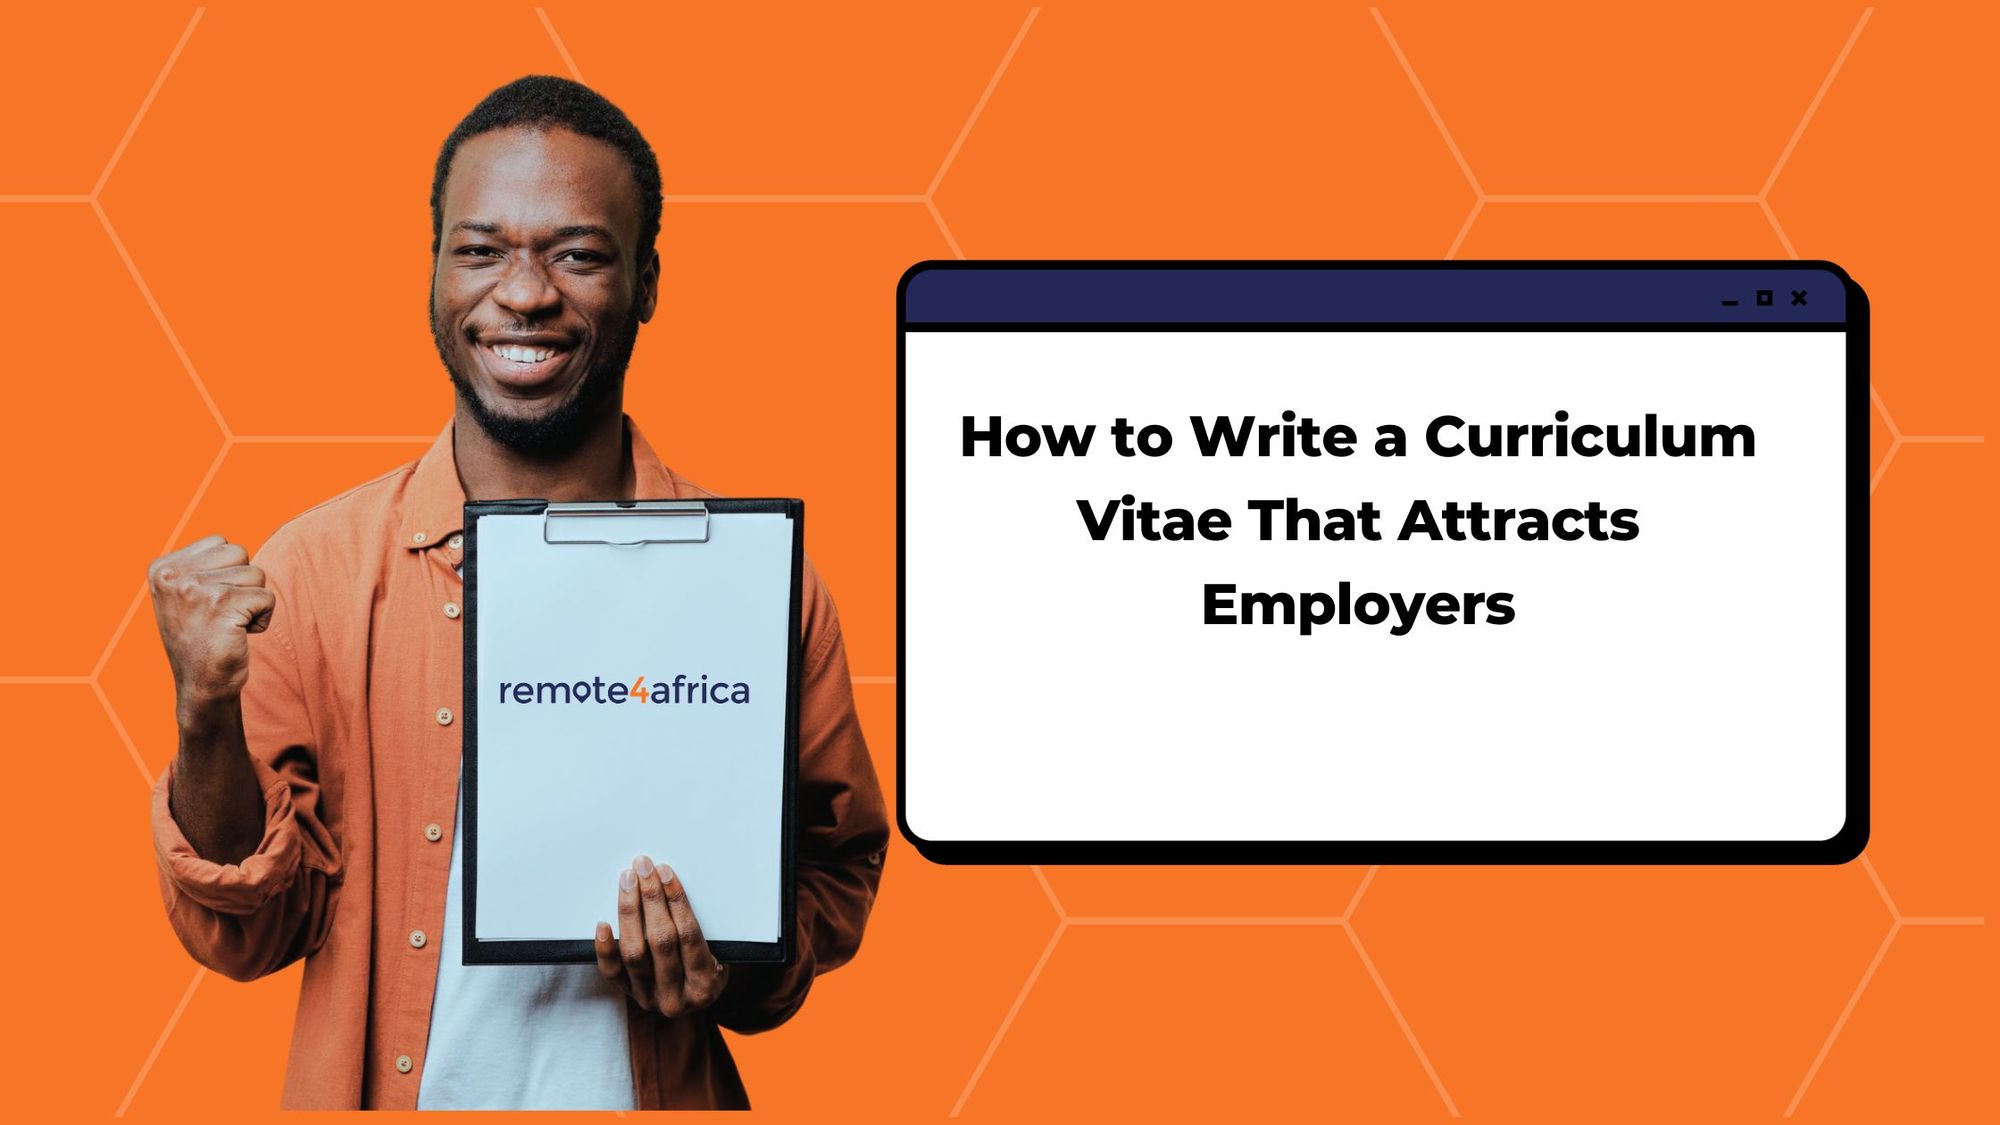 How to Write a Curriculum Vitae That Attracts Employers